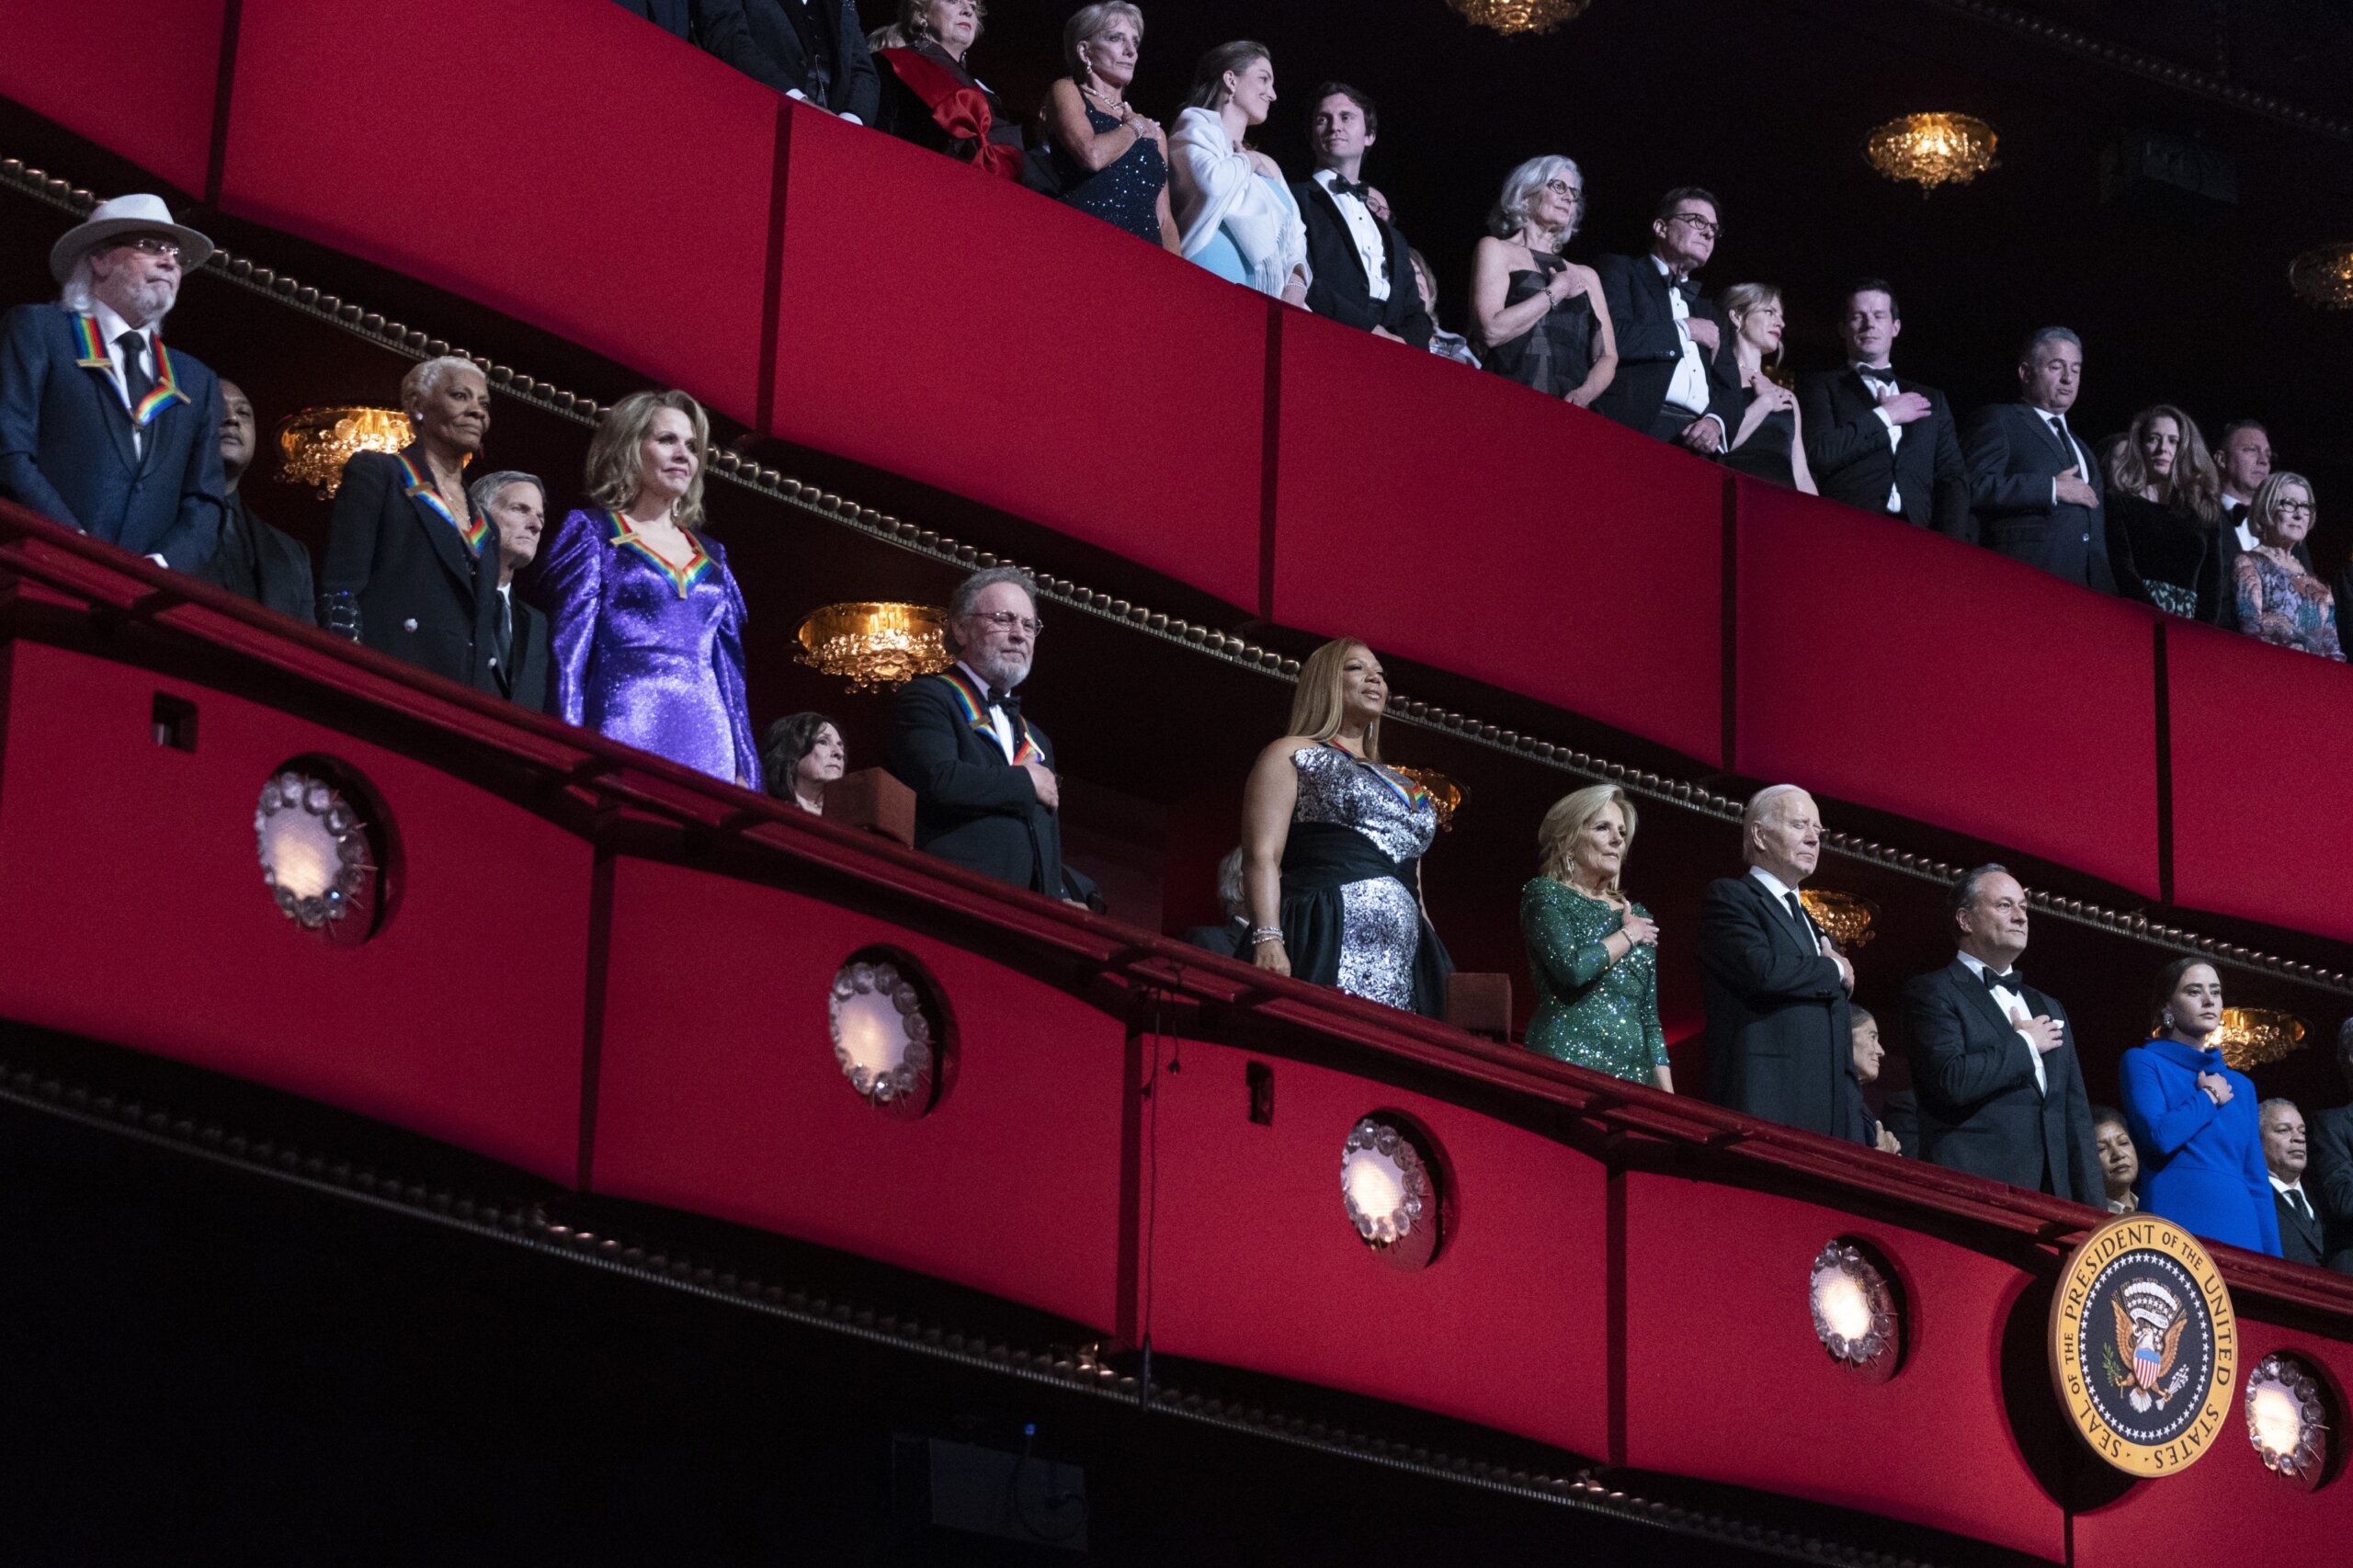 Kennedy Center Honors fetes new inductees, including Queen Latifah